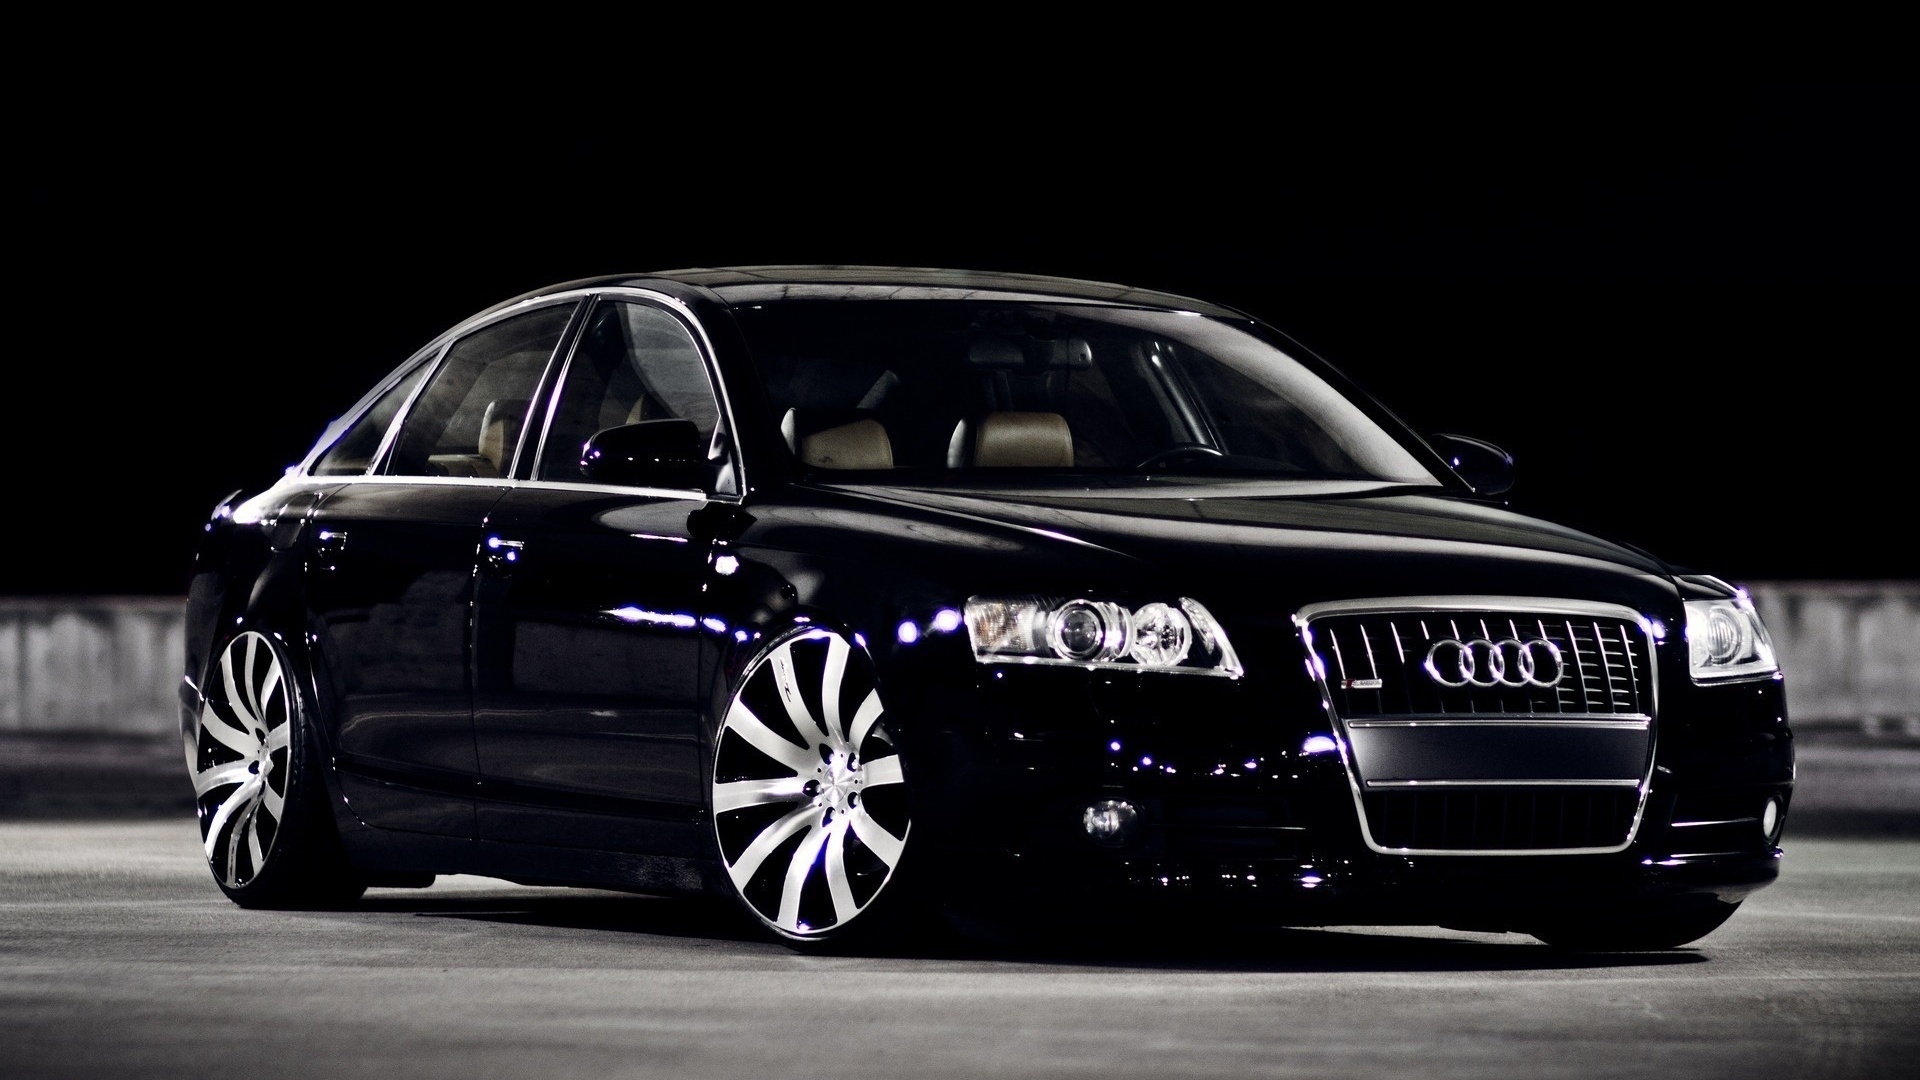 HD Wallpaper Audi A8 Background For Your Desktop And